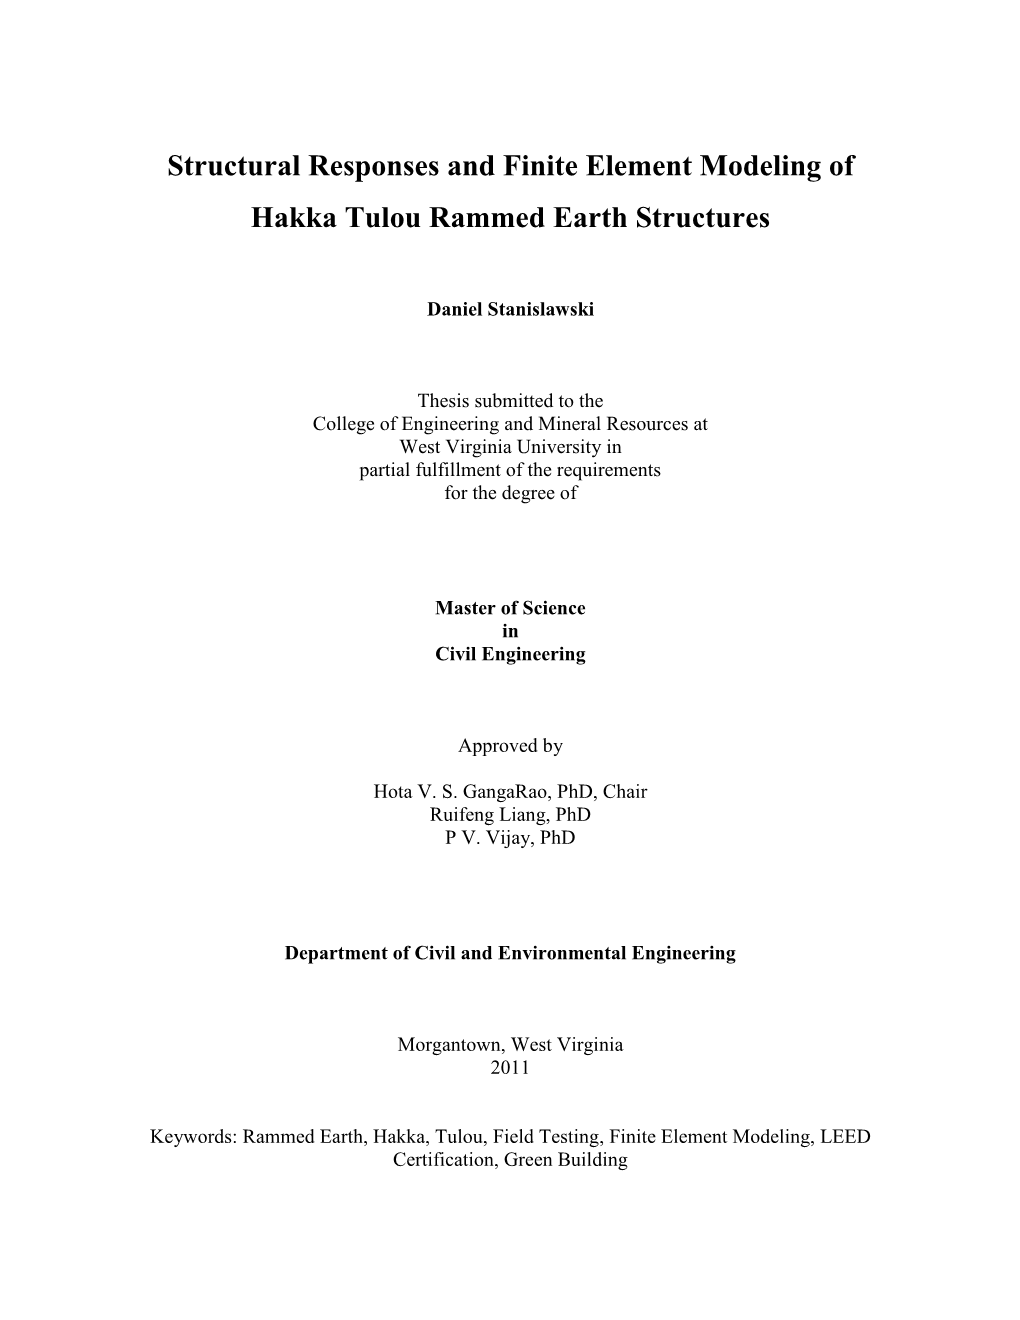 Structural Responses and Finite Element Modeling of Hakka Tulou Rammed Earth Structures